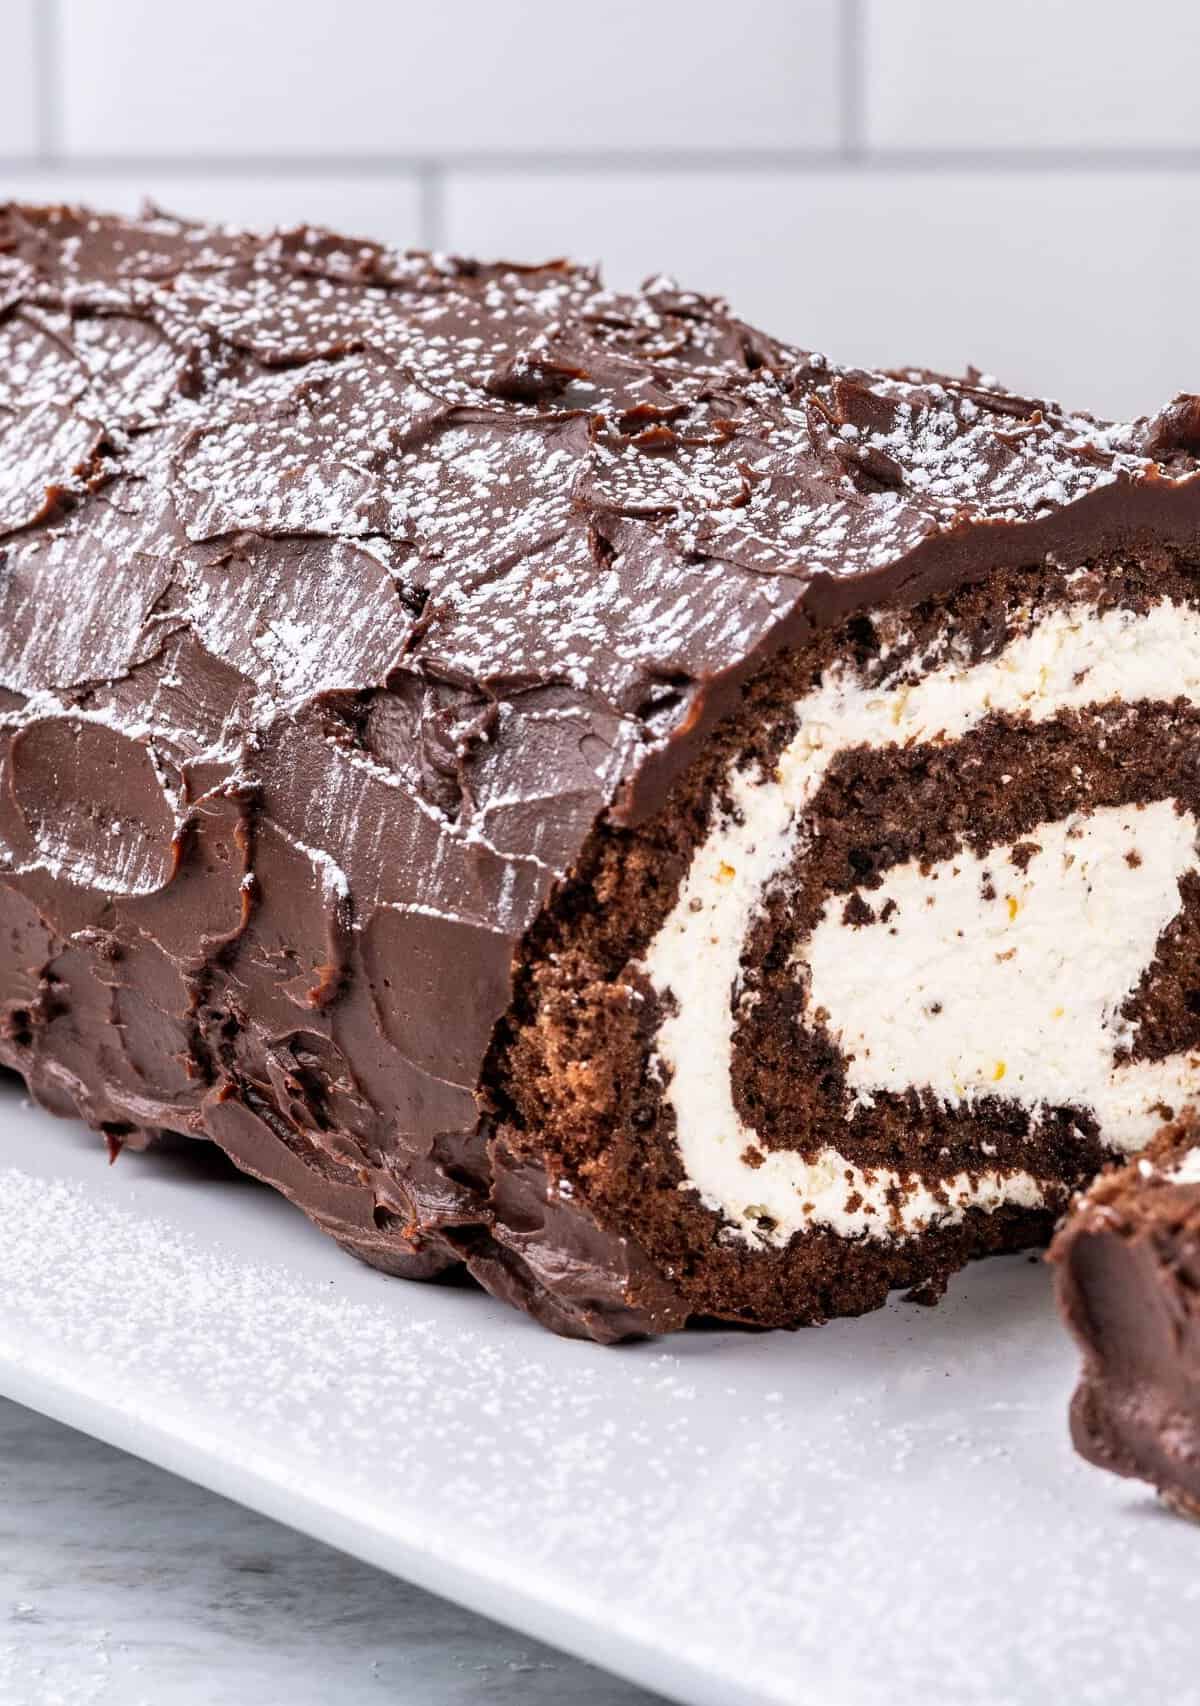  Chocolate and orange are the stars of the show in this cake roll that is sure to impress.